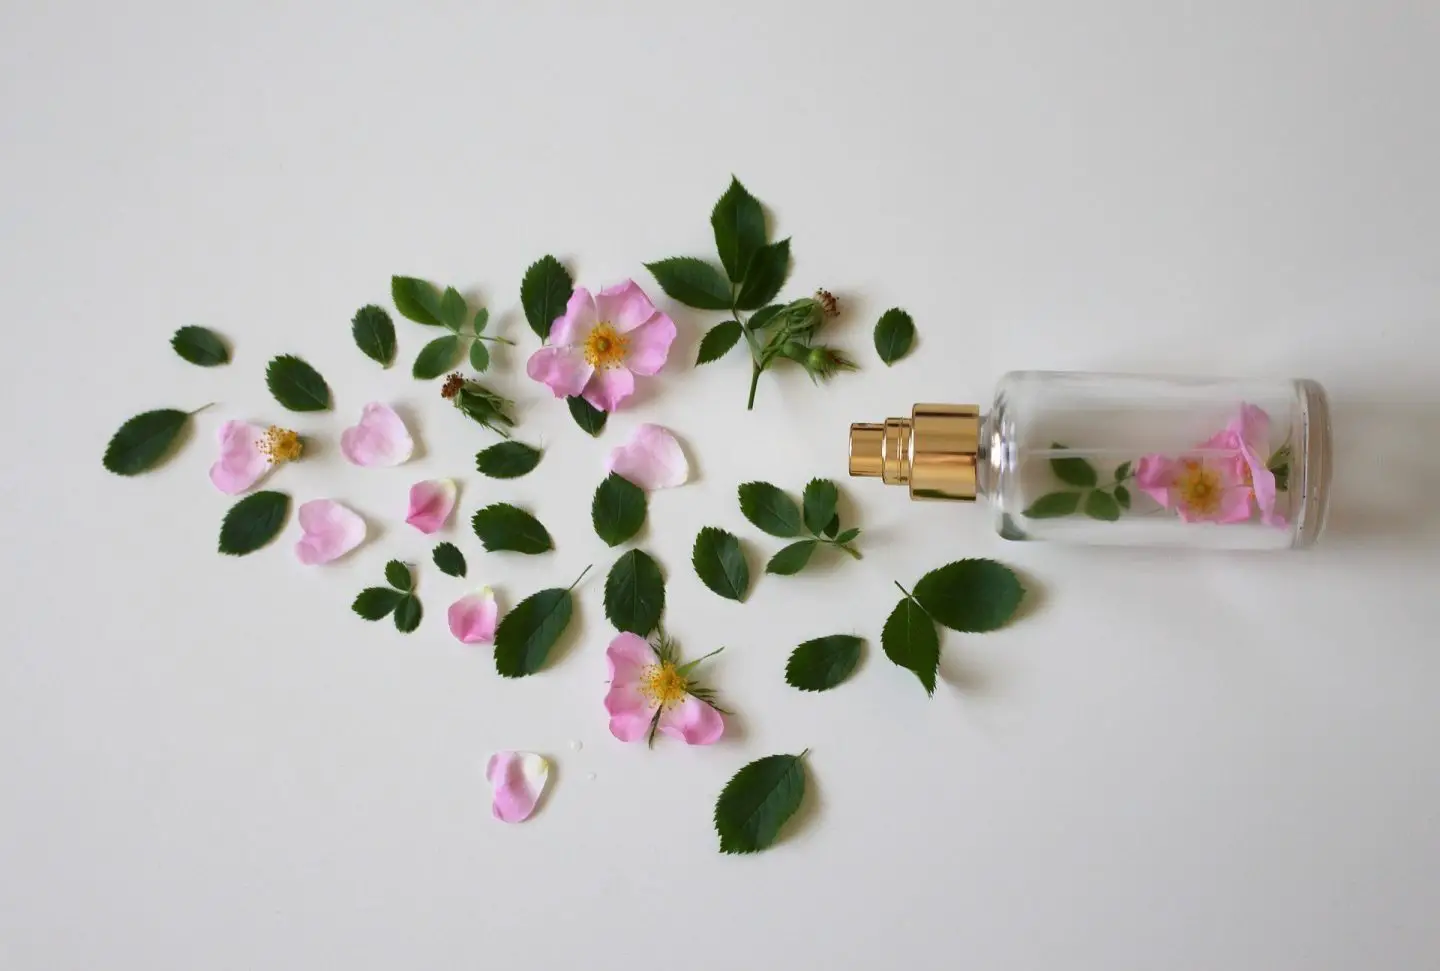 A perfume bottles lying on it's side with flower petals and leaves inside it and on the surrounding area